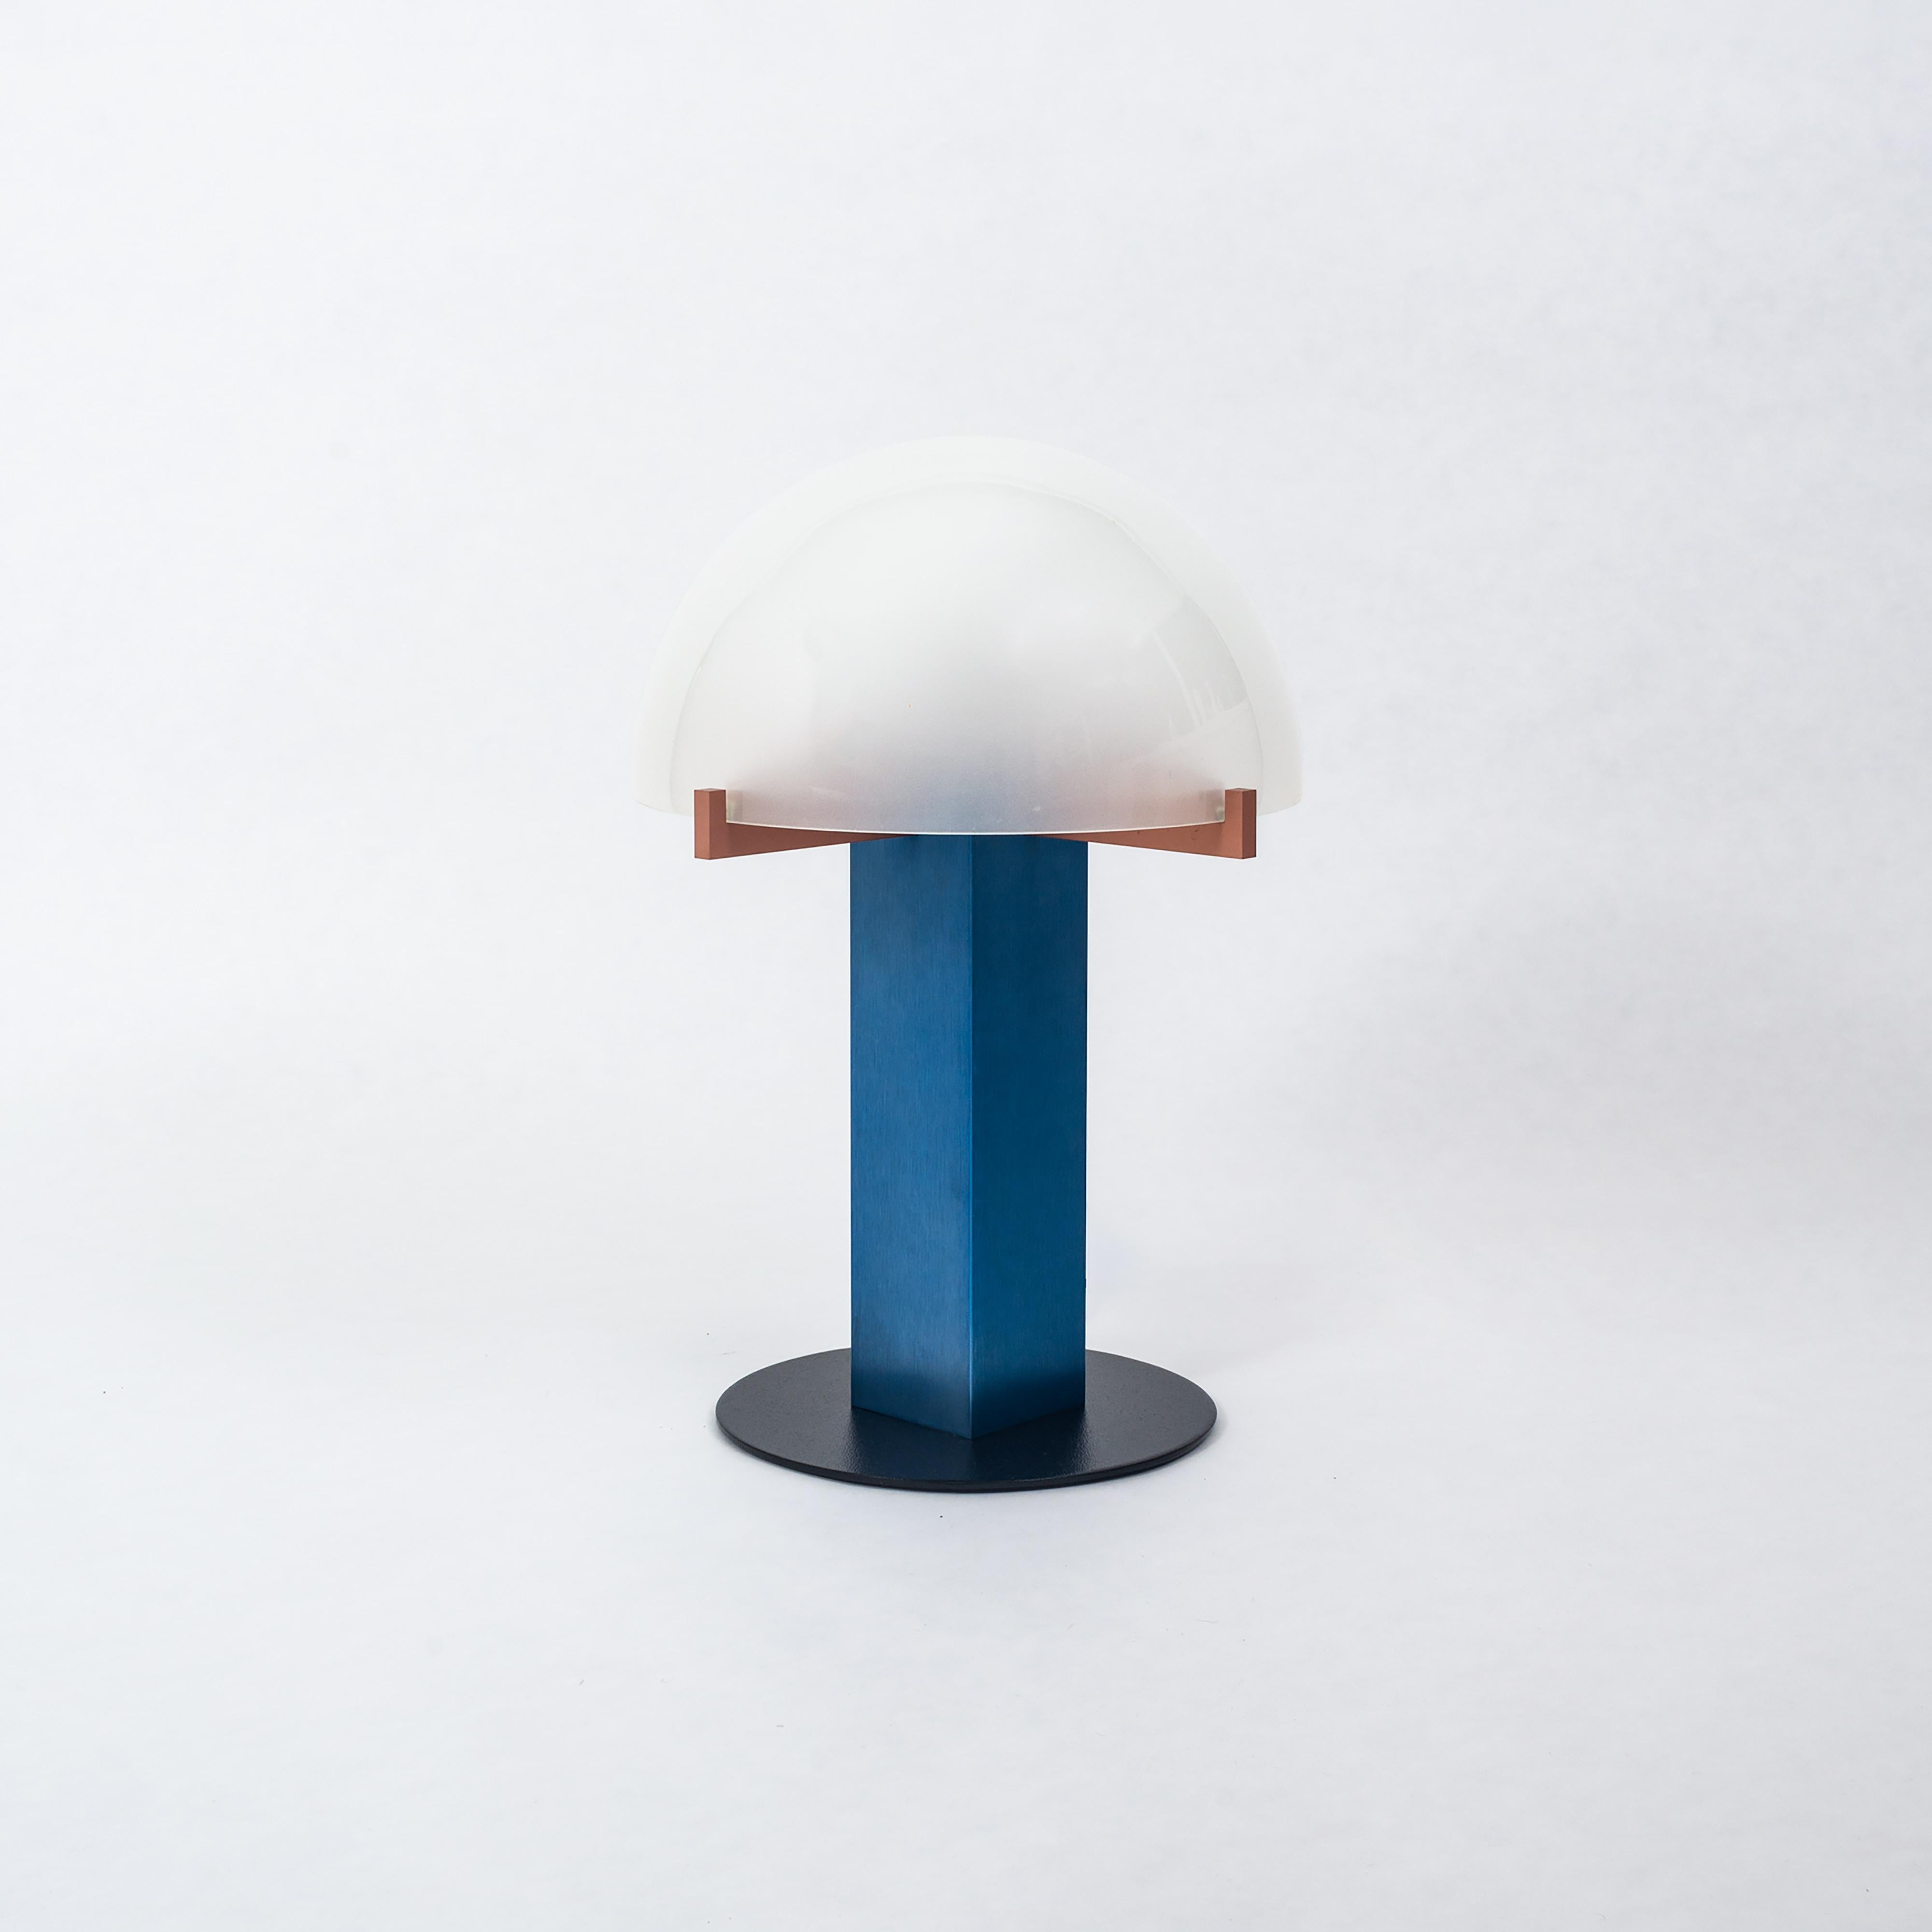 A Modern table lamp by Ron Rezek, circa 1980s. Also known as the 